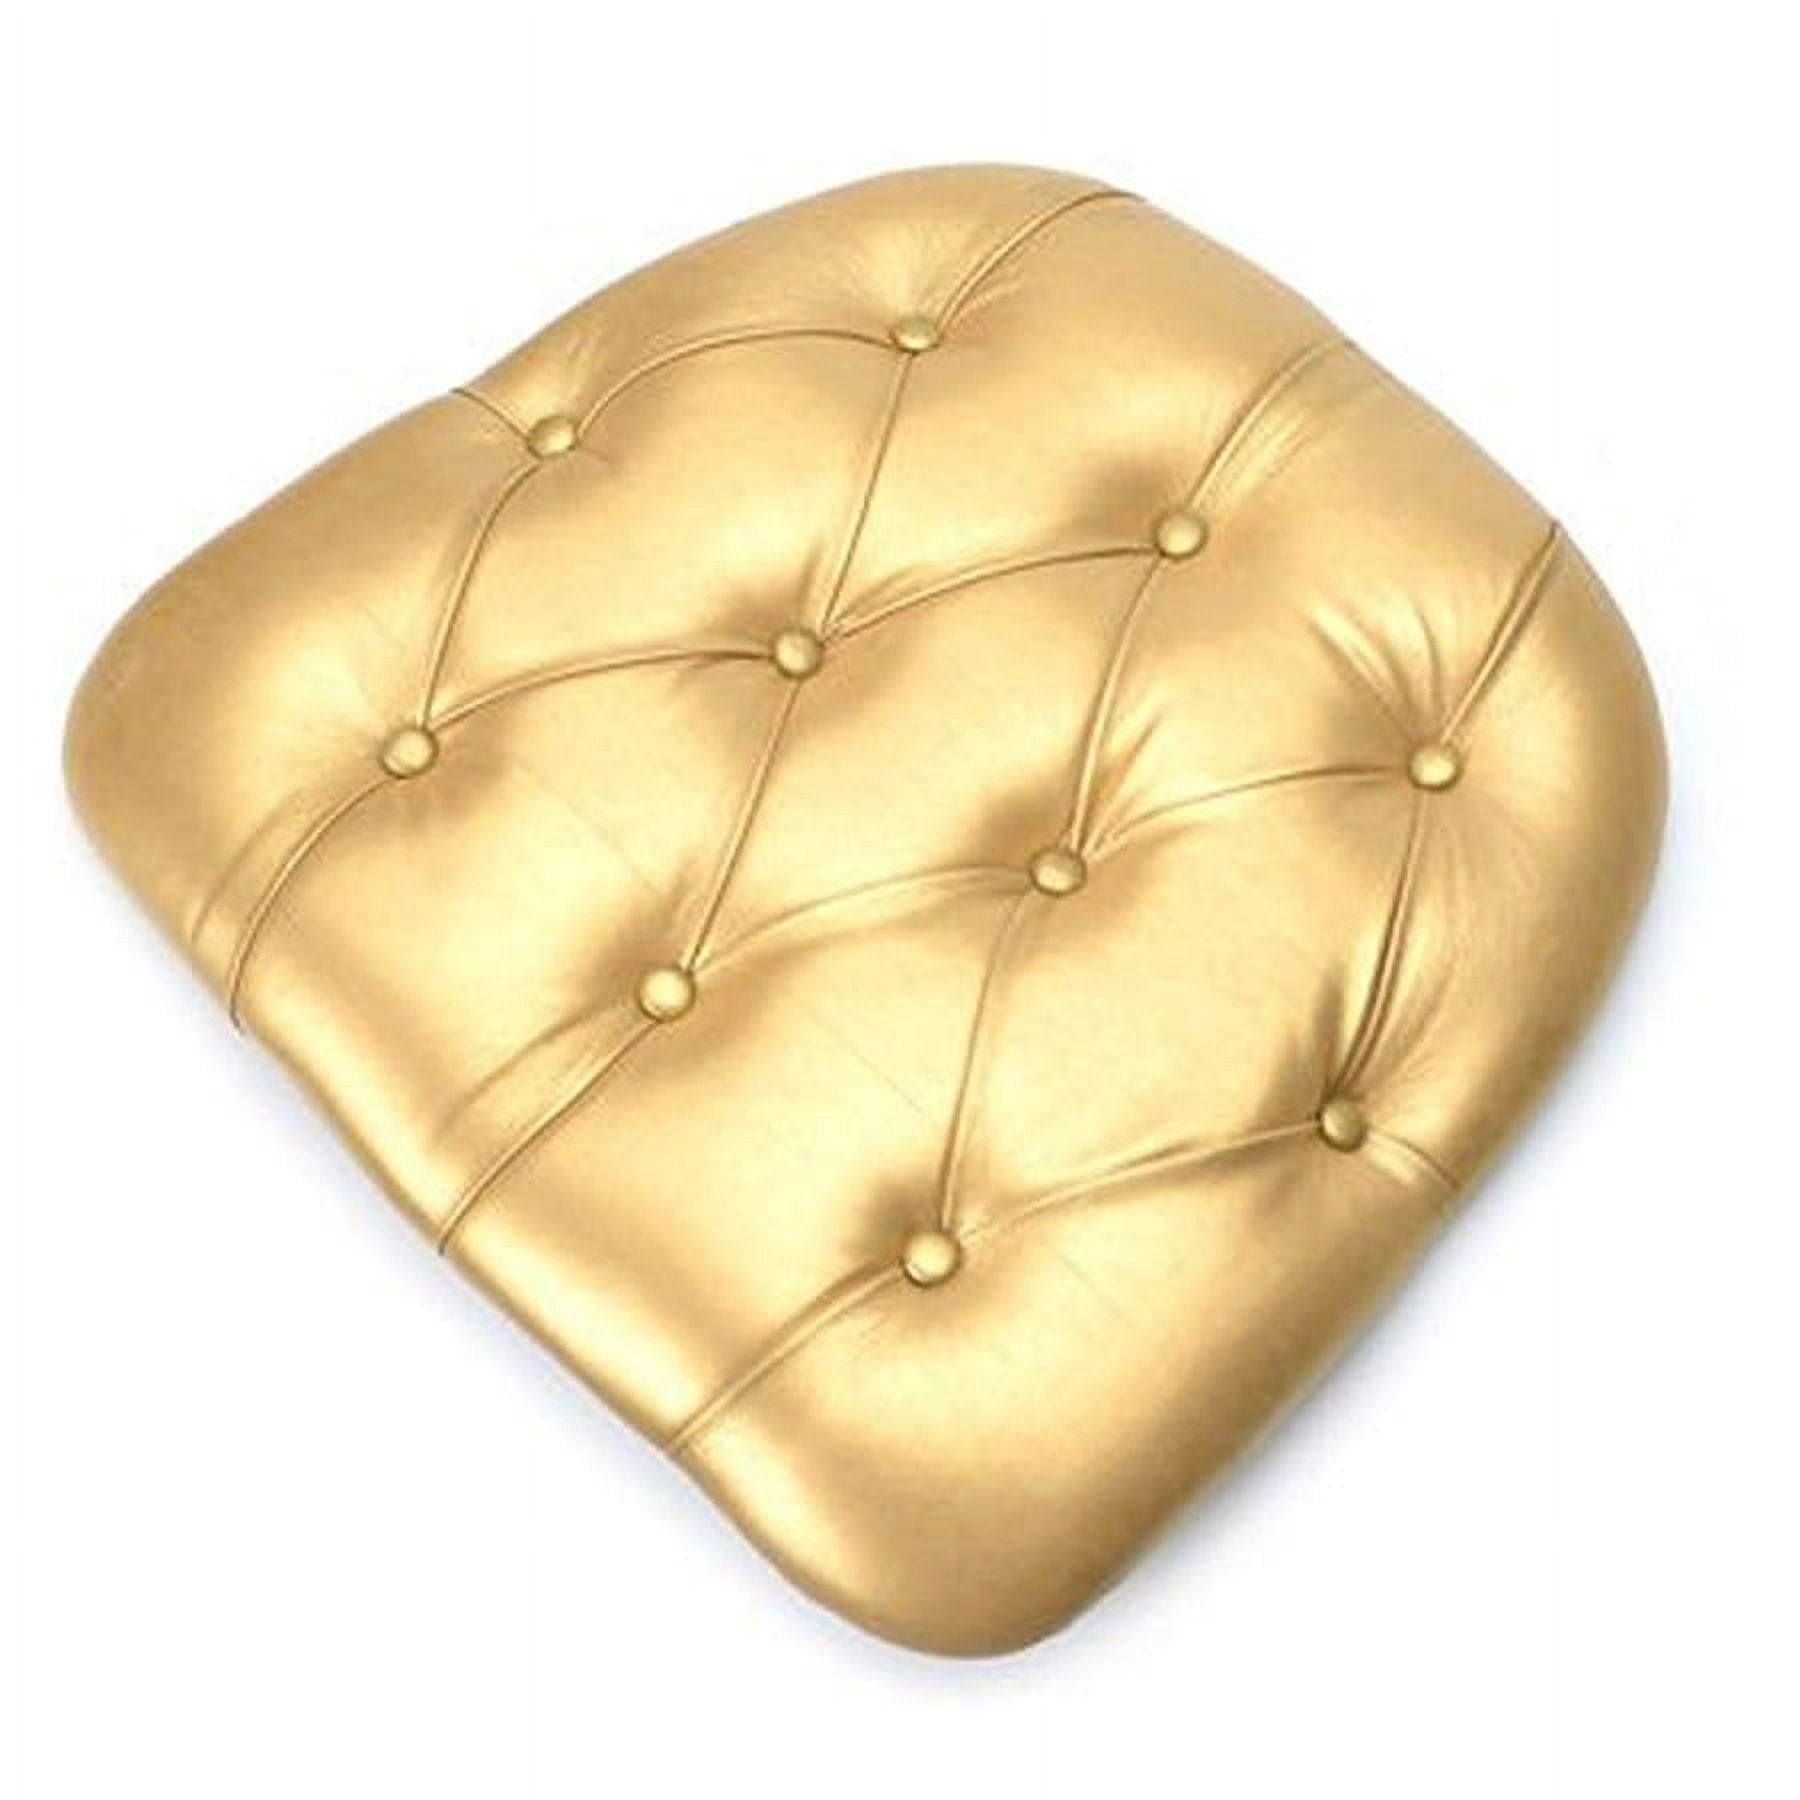 Cup-v-tufted-gl-web4 Indoor & Outdoor Gold Tufted Vinyl Cushions, Set Of 4 - 2 X 16 X 16 In.